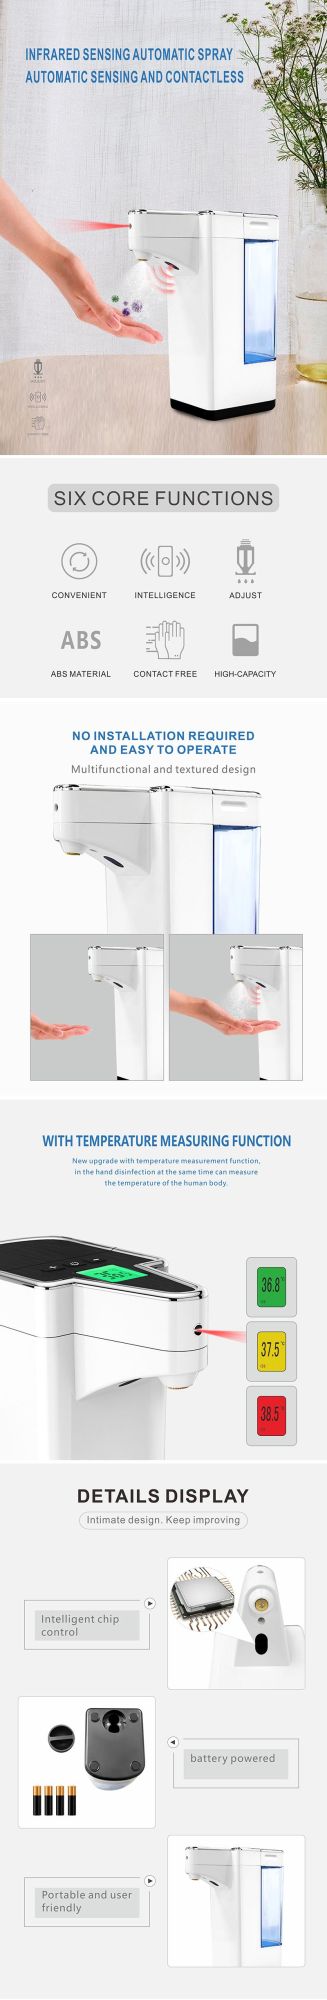 Battery-Powered Desktop Multi-Scene Application Disinfectant Dispenser, Automatic Hands-Free Soap and Hand Sanitizer Dispenser with CE Certification